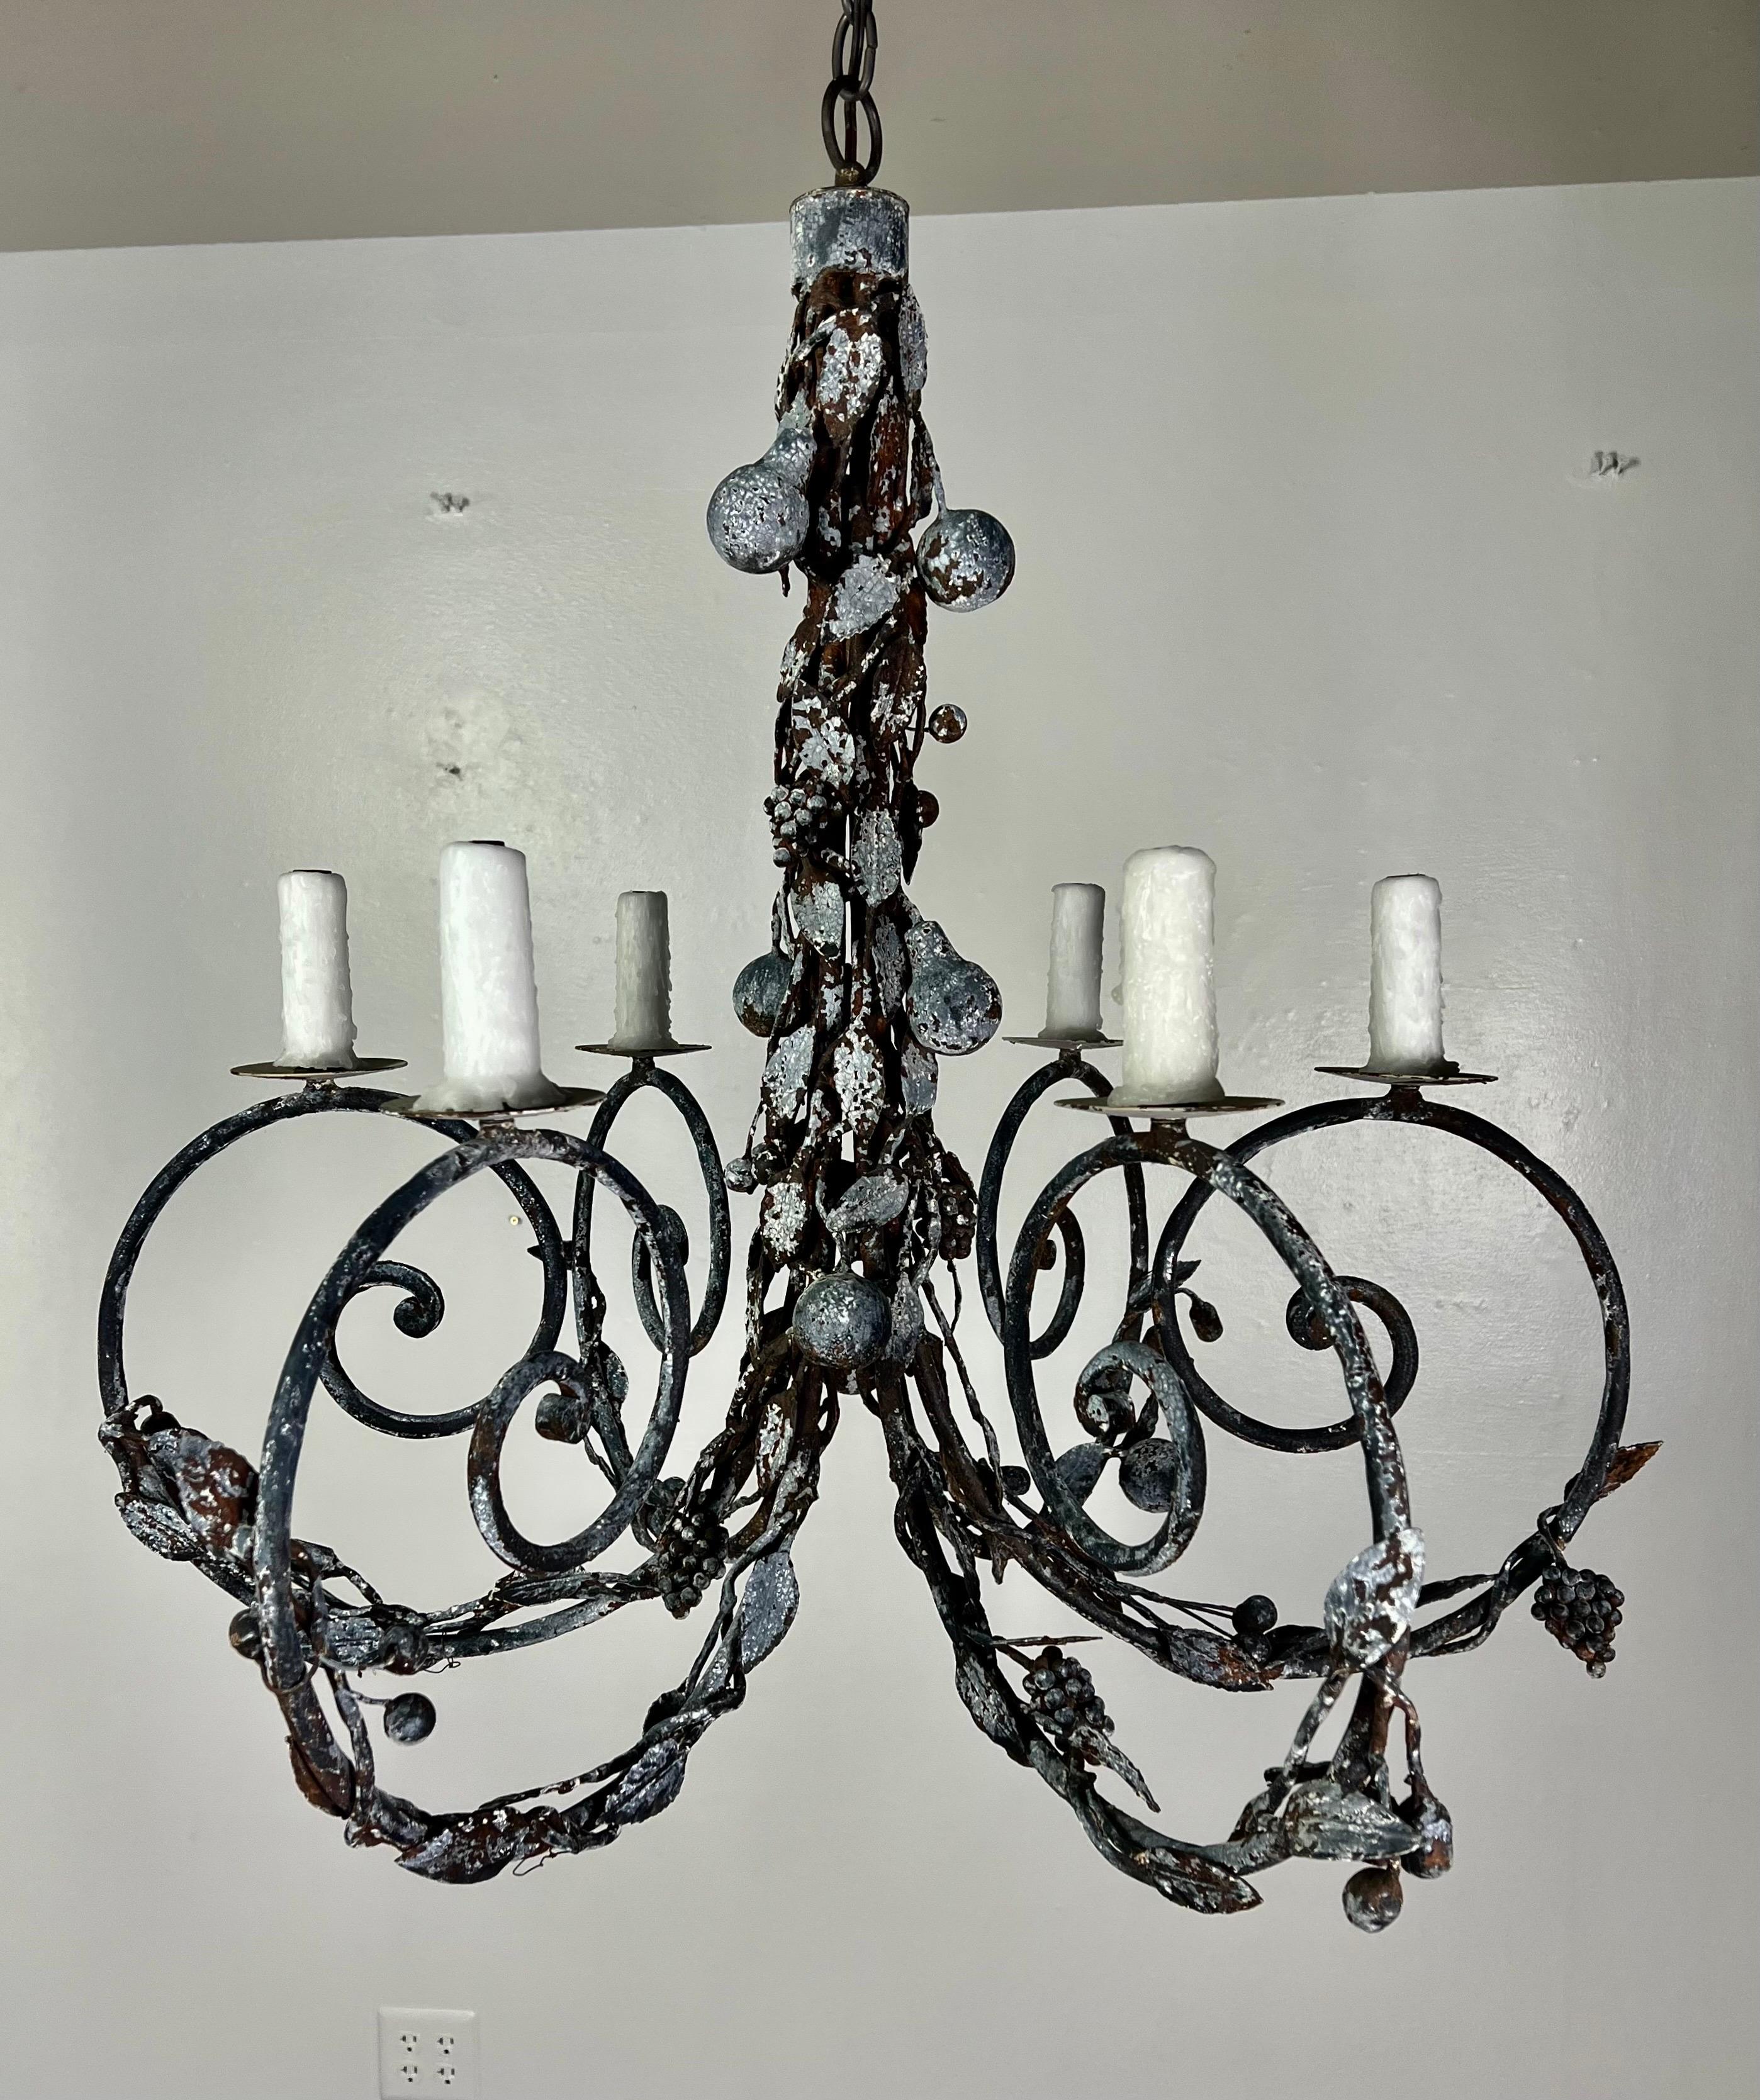 Six light painted wrought iron chandelier by Ironies. The six scrolled arms are adorned with fruit and foliage and continues up the body of the chandelier. The fixture is newly rewired with drip wax candle covers. It includes chain & canopy.